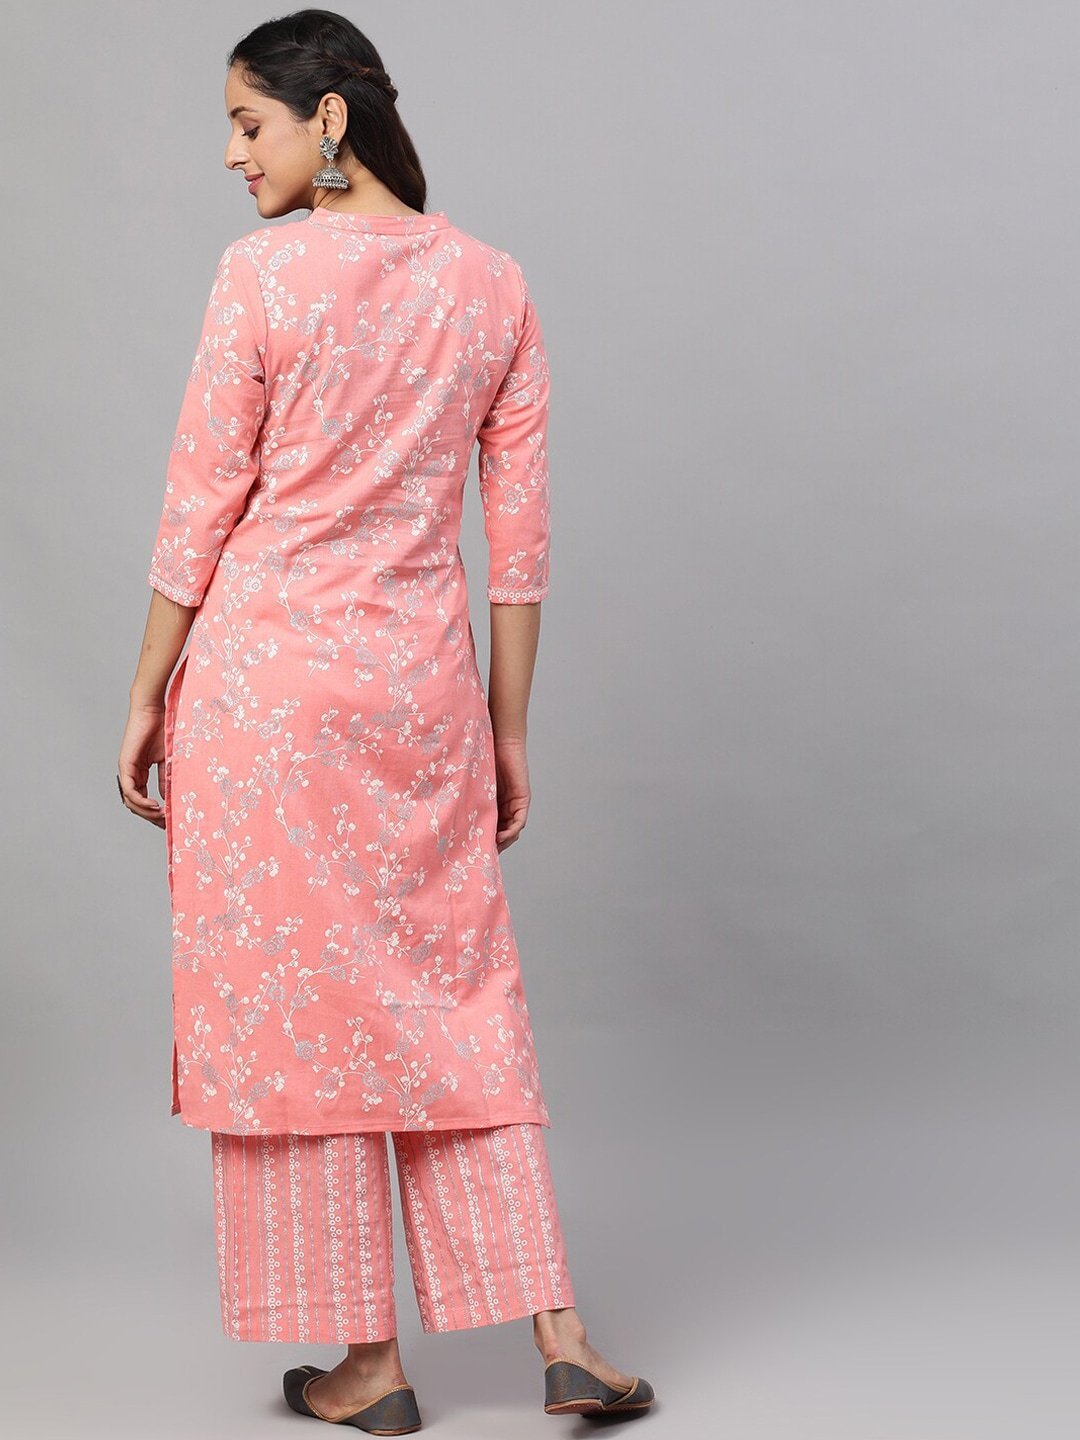 Women's  Peach-Coloured & Silver-Toned Printed Kurti with Palazzos - AKS